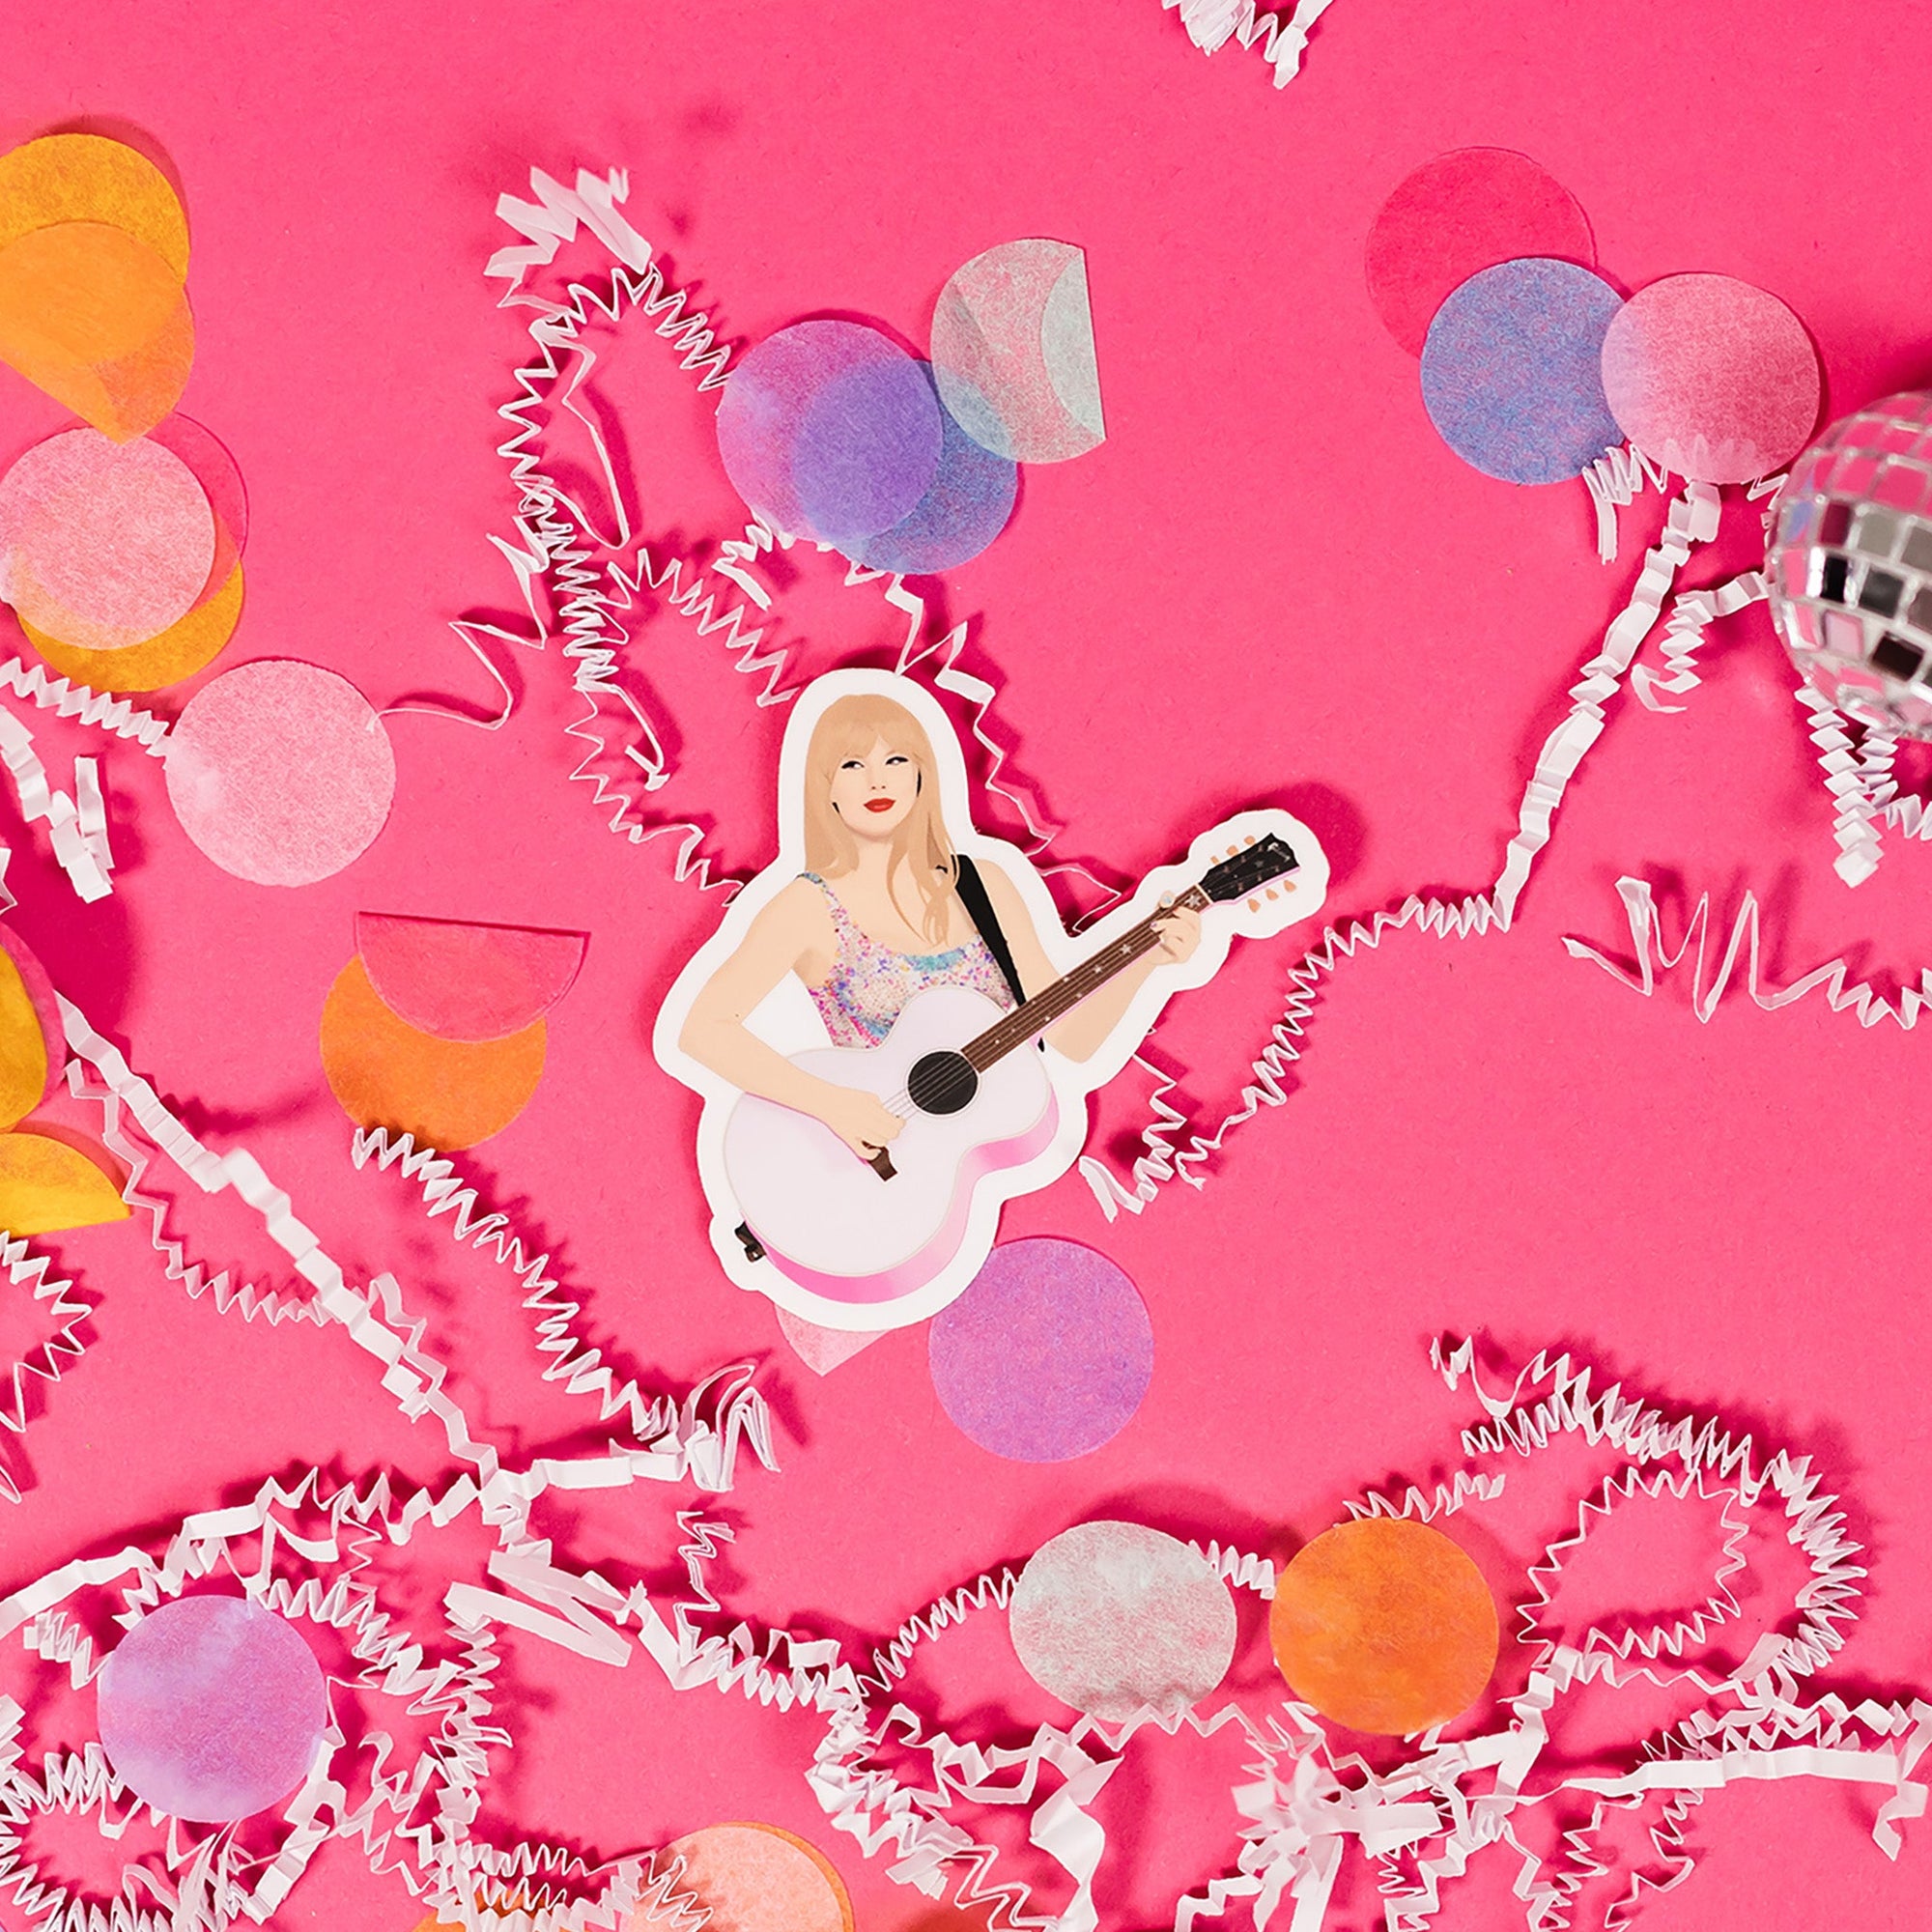 On a hot pink background sits a sticker with white crinkle and big, colorful confetti scattered around. This Taylor Swift inspired sticker is an illustration of Taylor Swift holding a pink guitar.